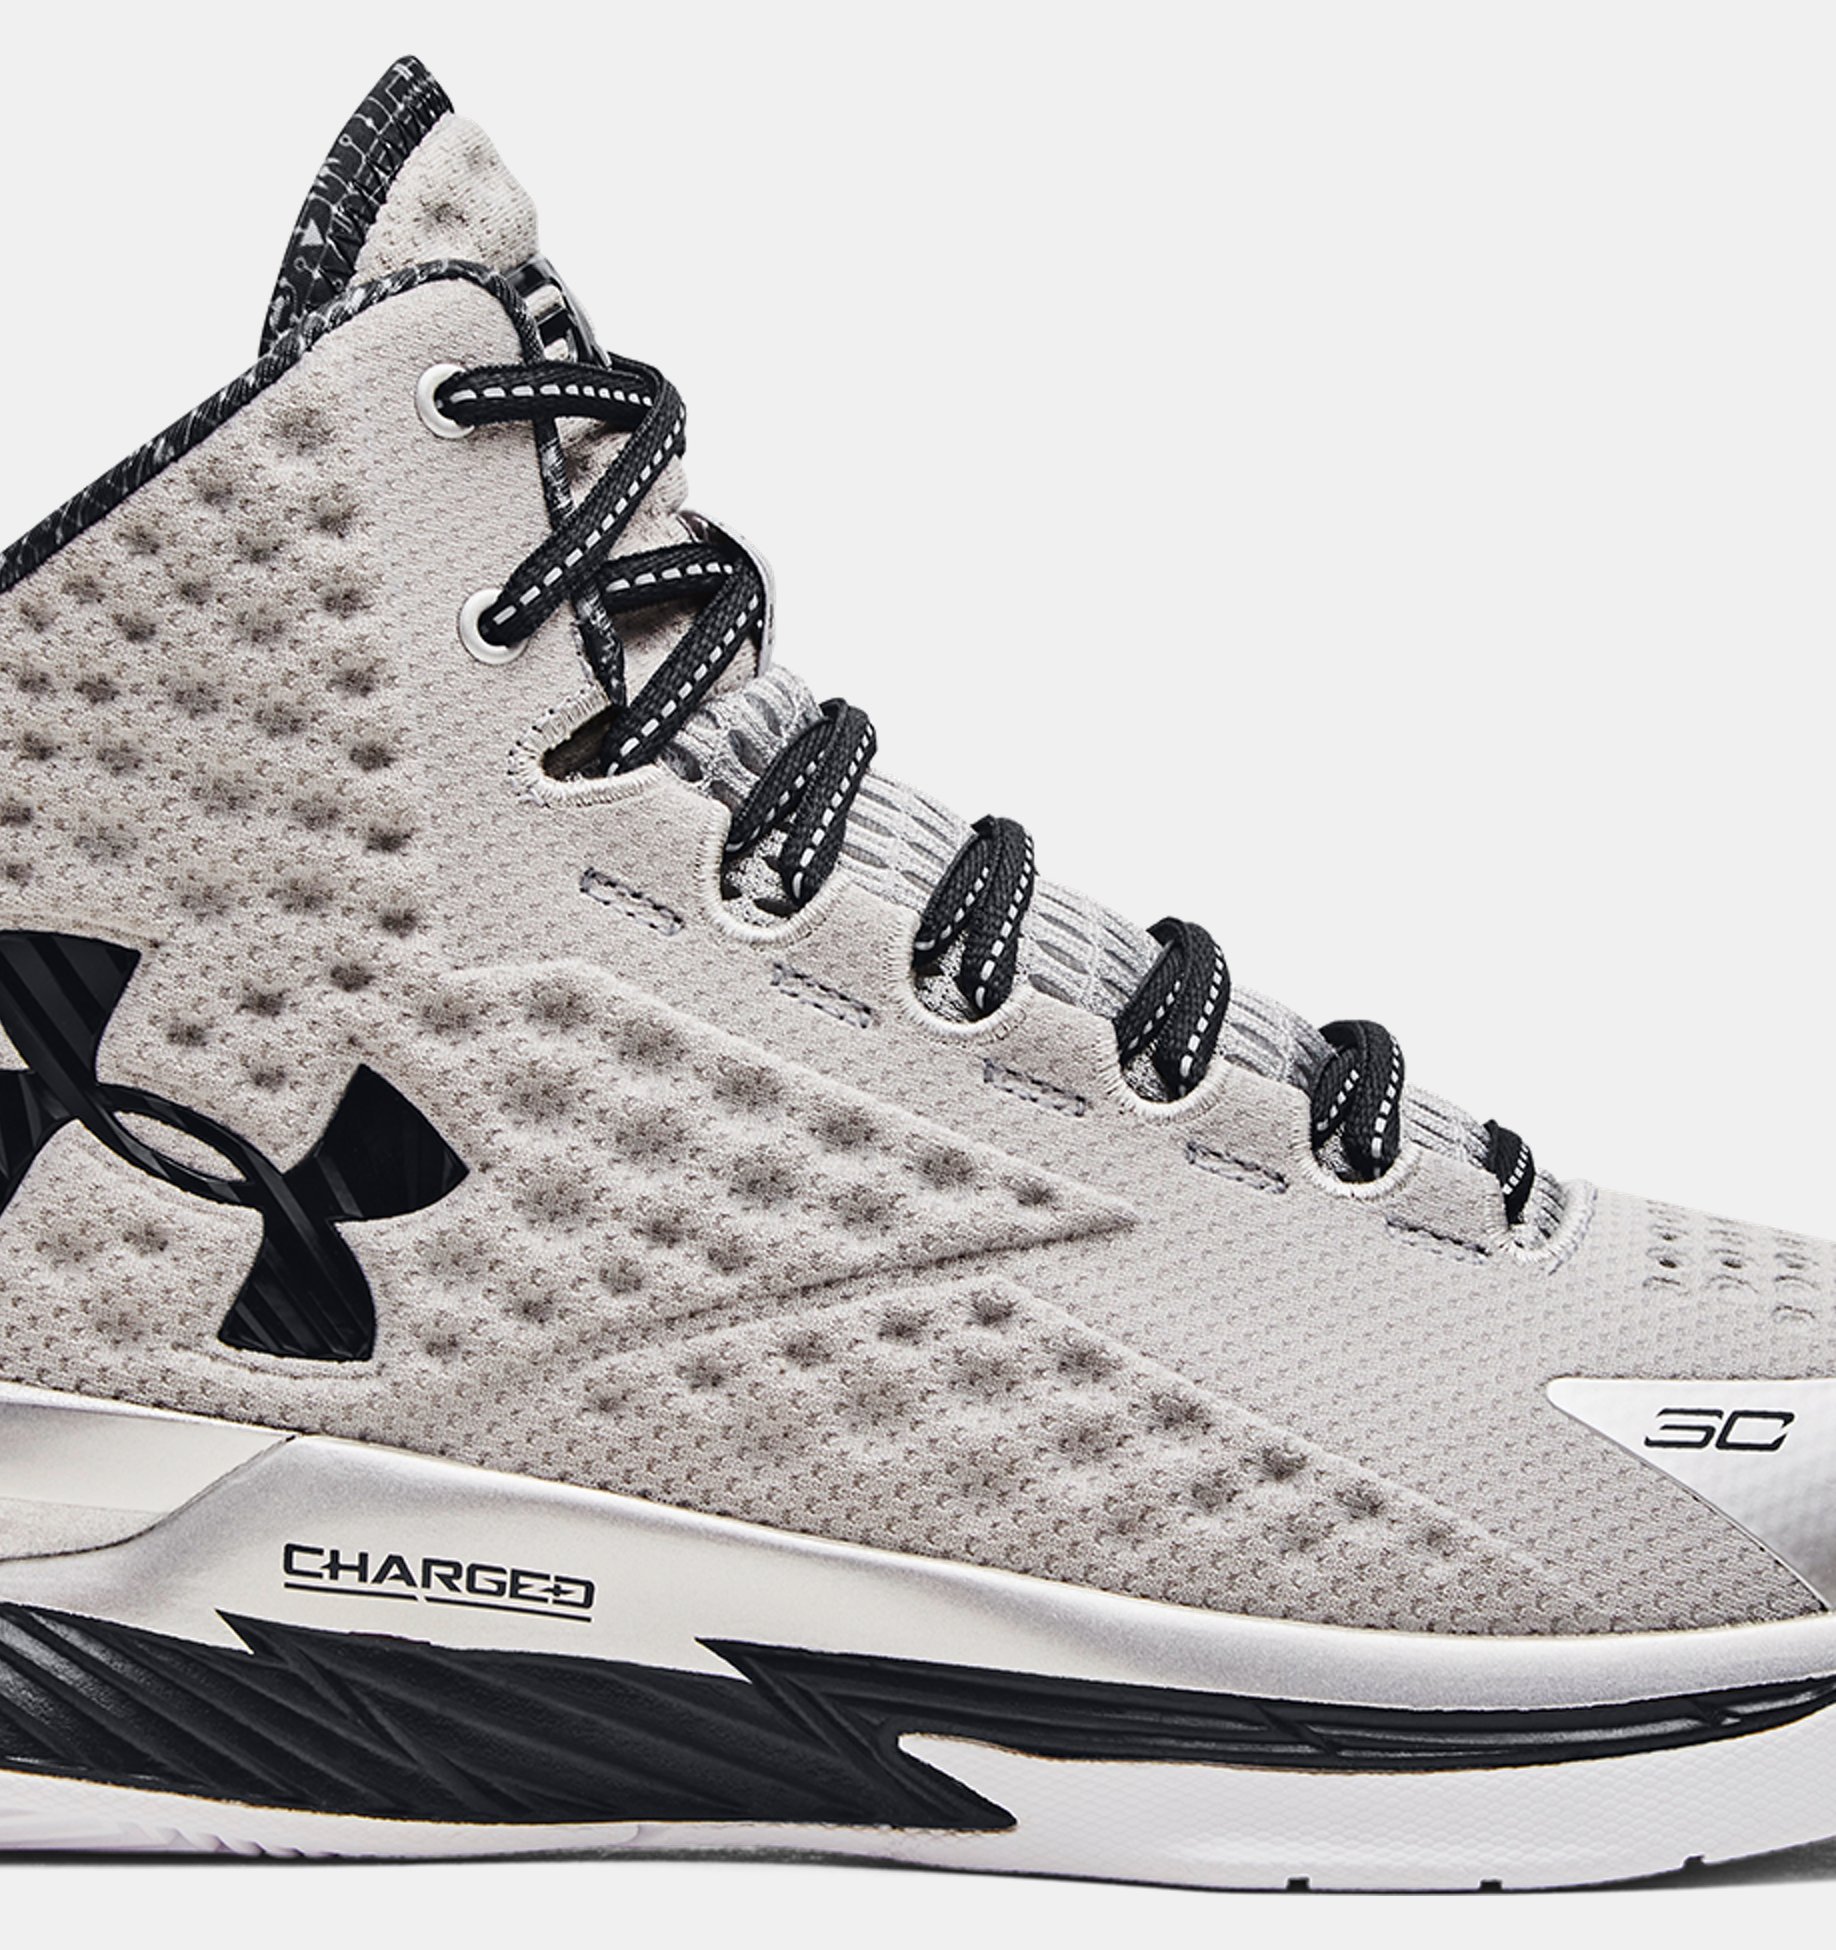 Where to Buy Stephen Curry Under Armour Shoes?